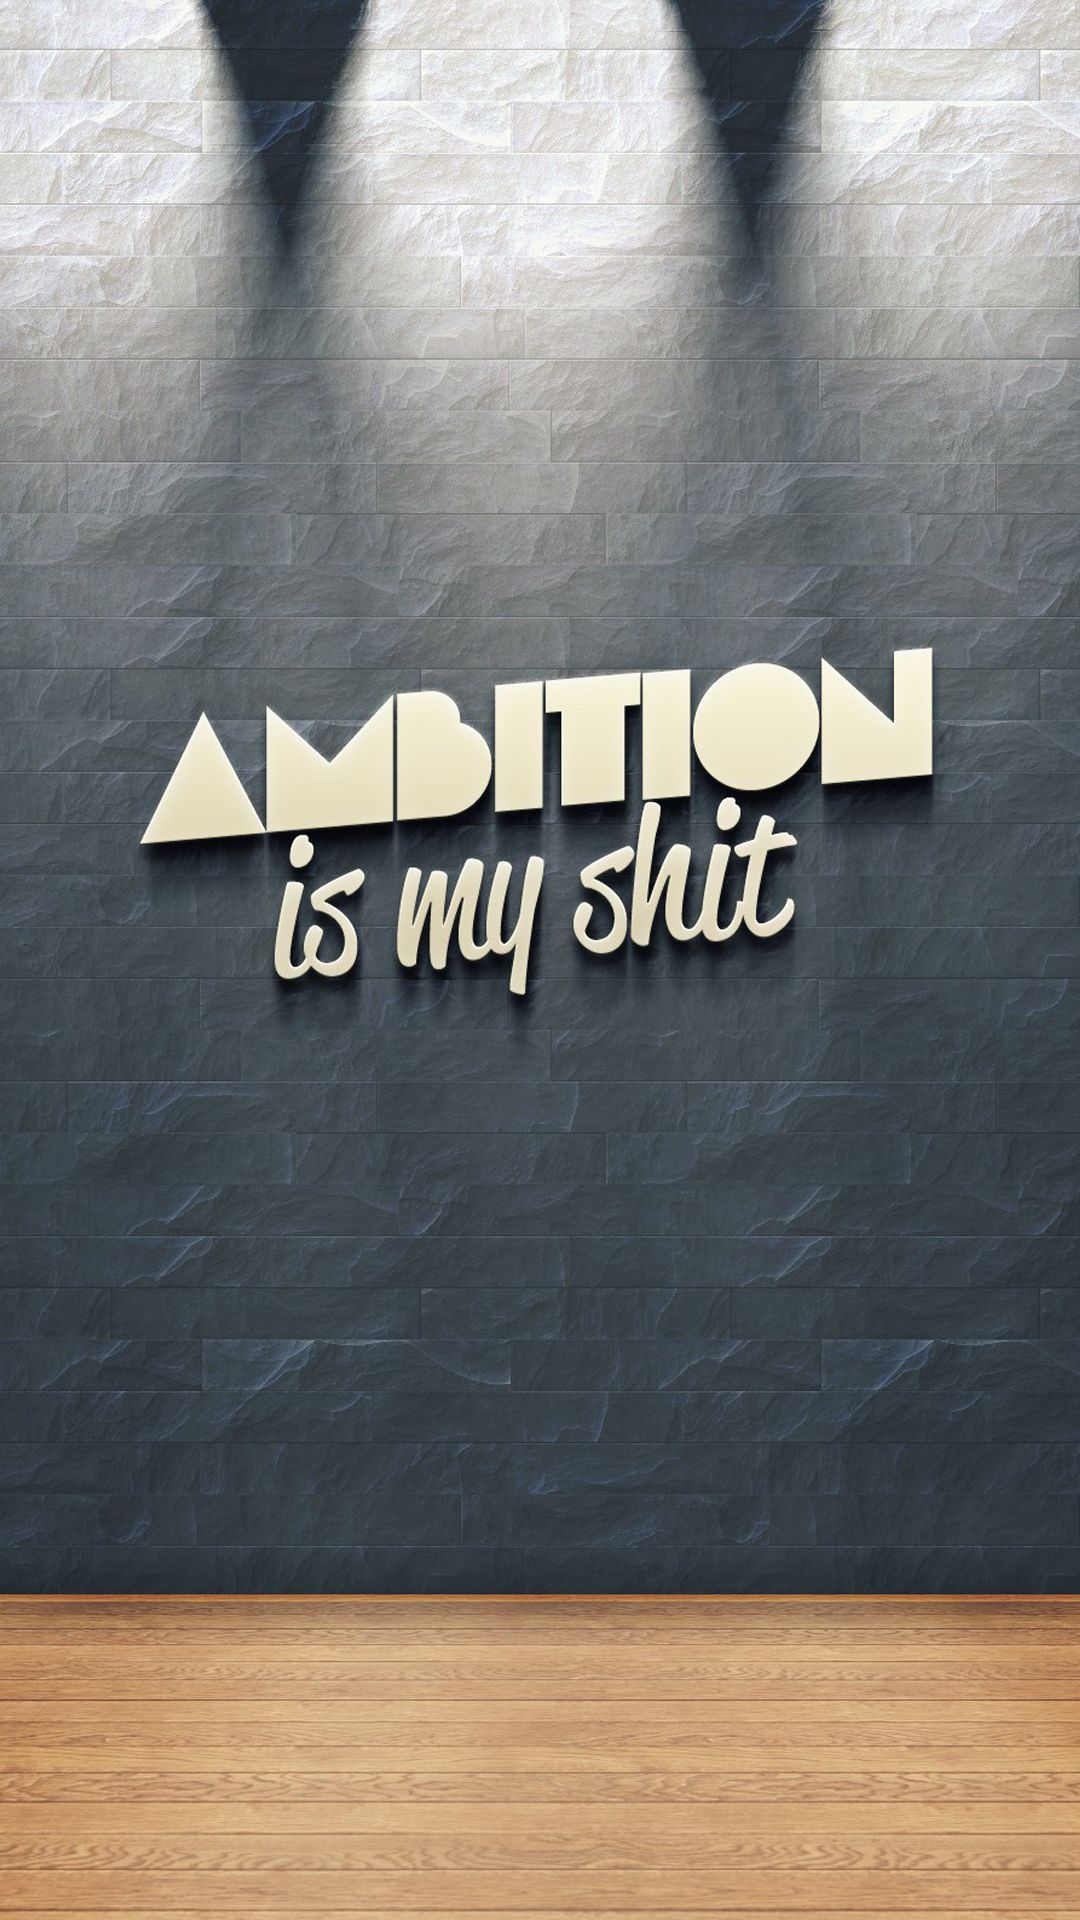 Ambition Wallpapers